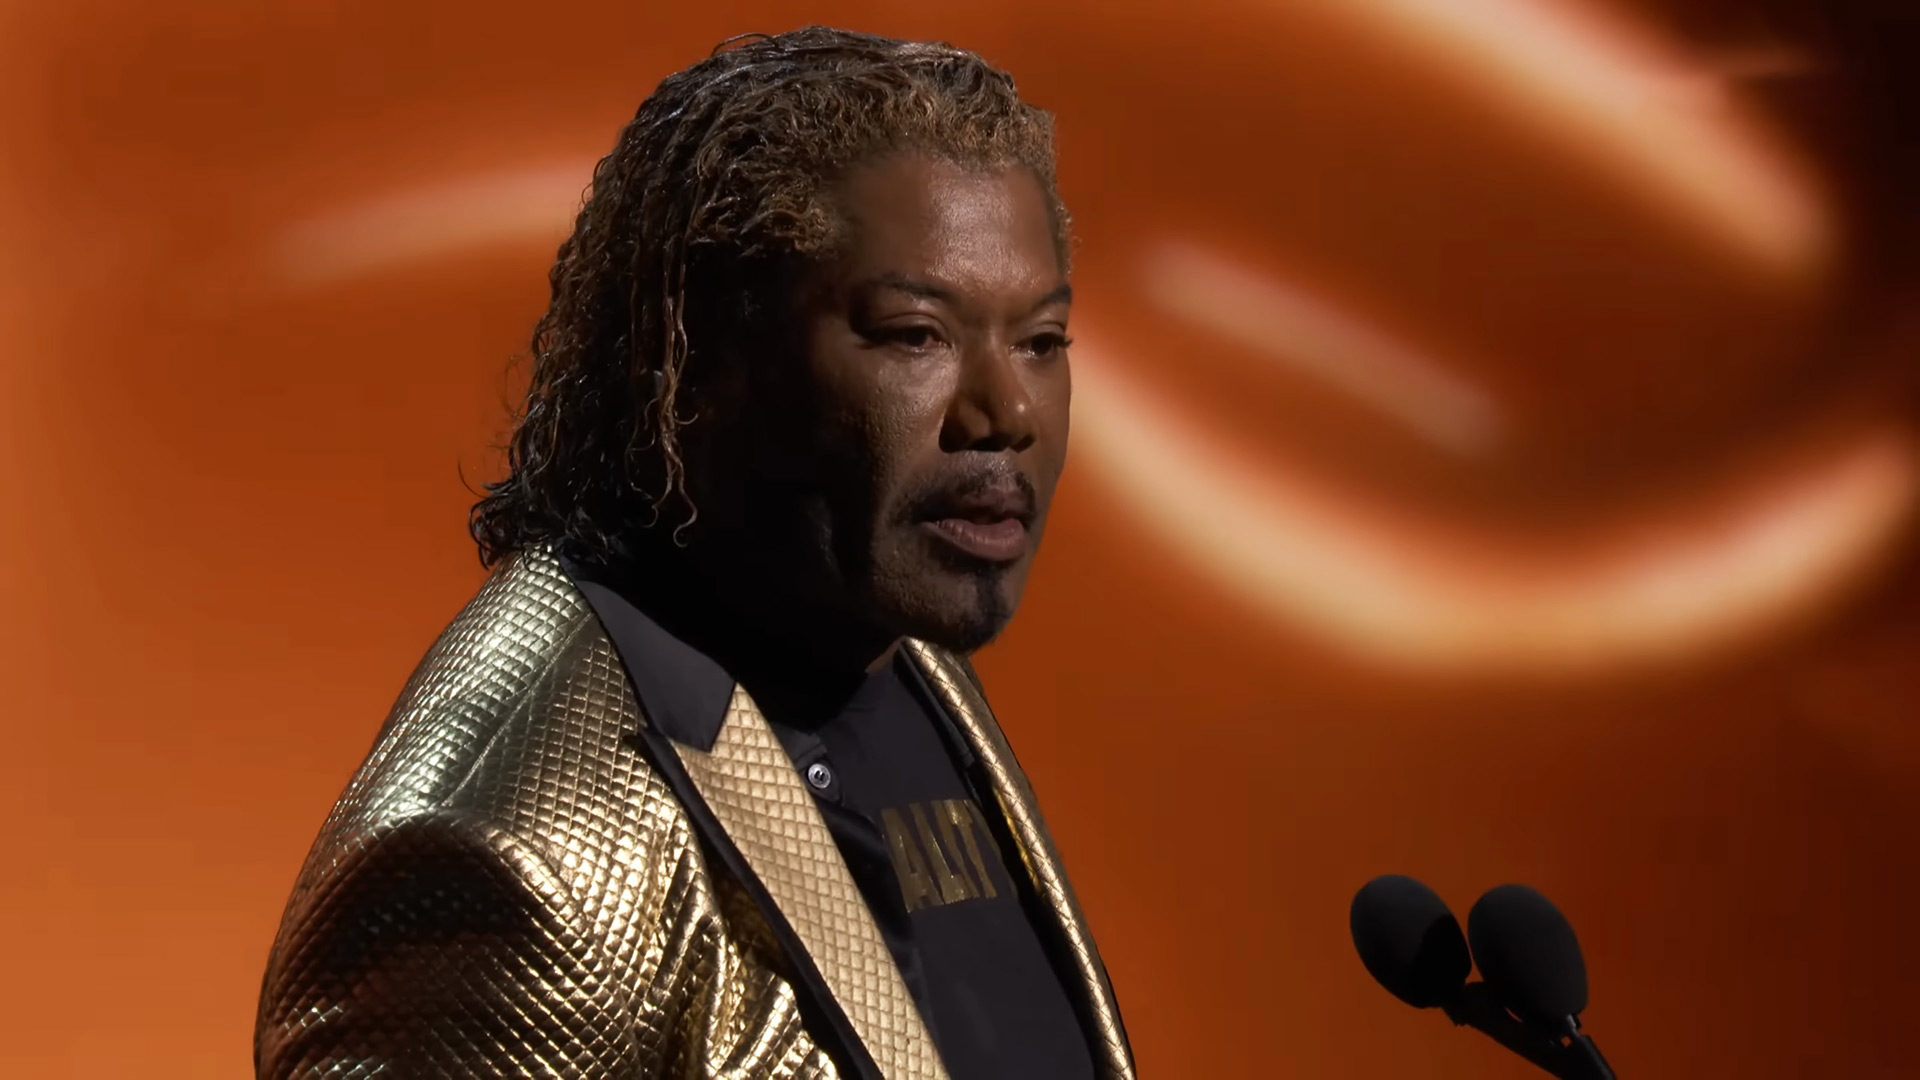 Kratos Actor Christopher Judge's TGA Speech Could Be World Record Breaker